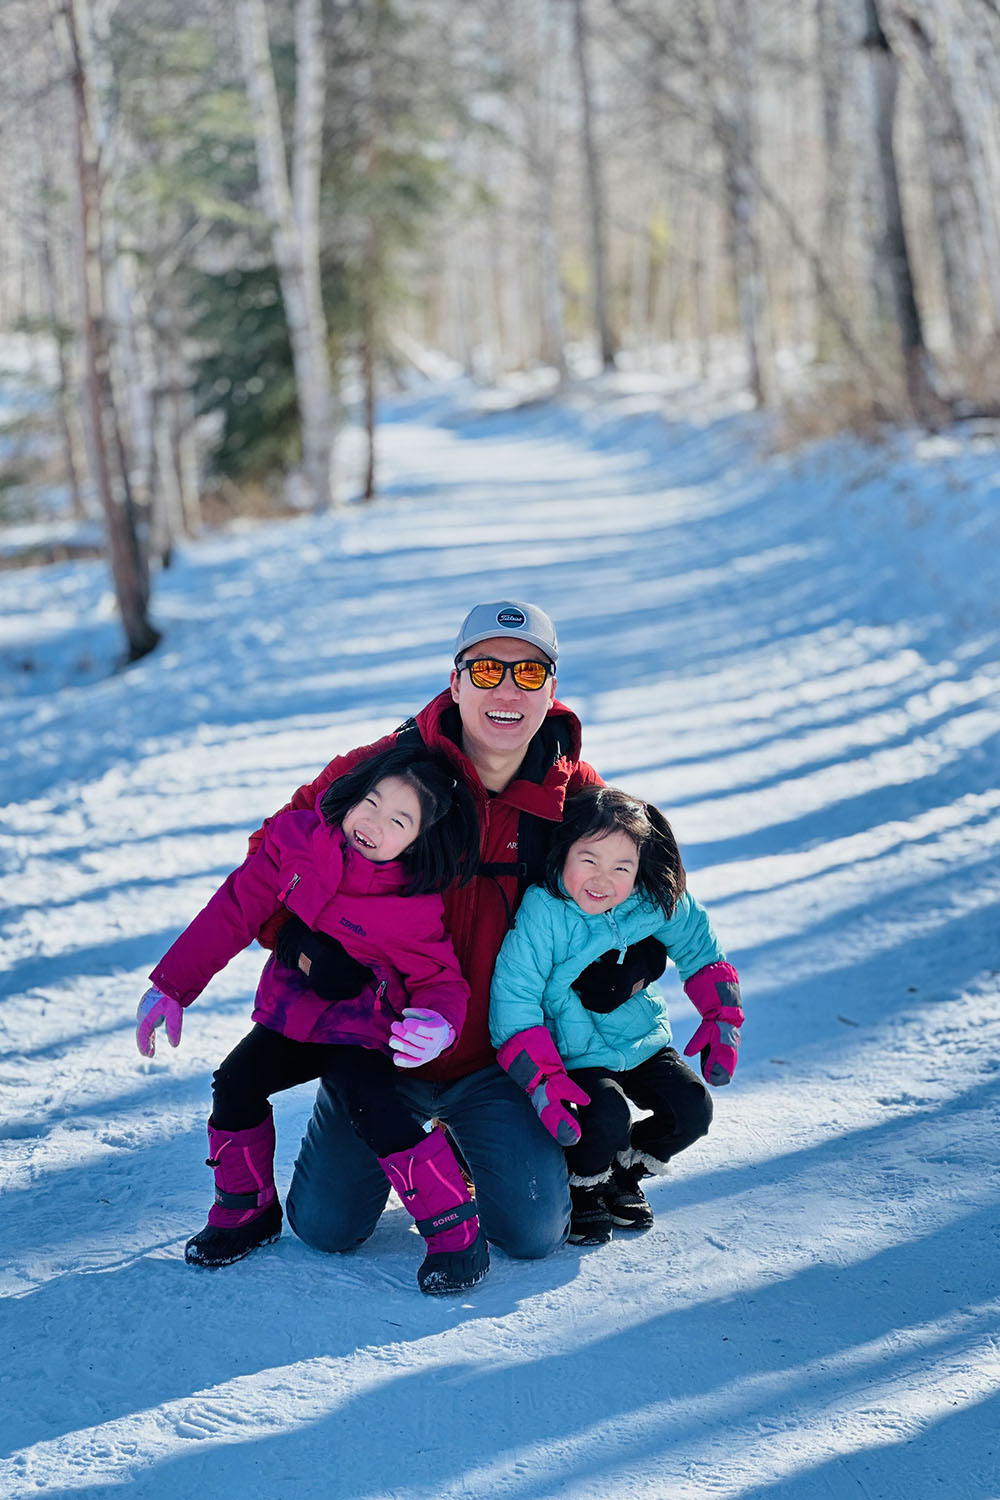 Dr. Justin loves going to the mountains with his beautiful wife and two daughters!